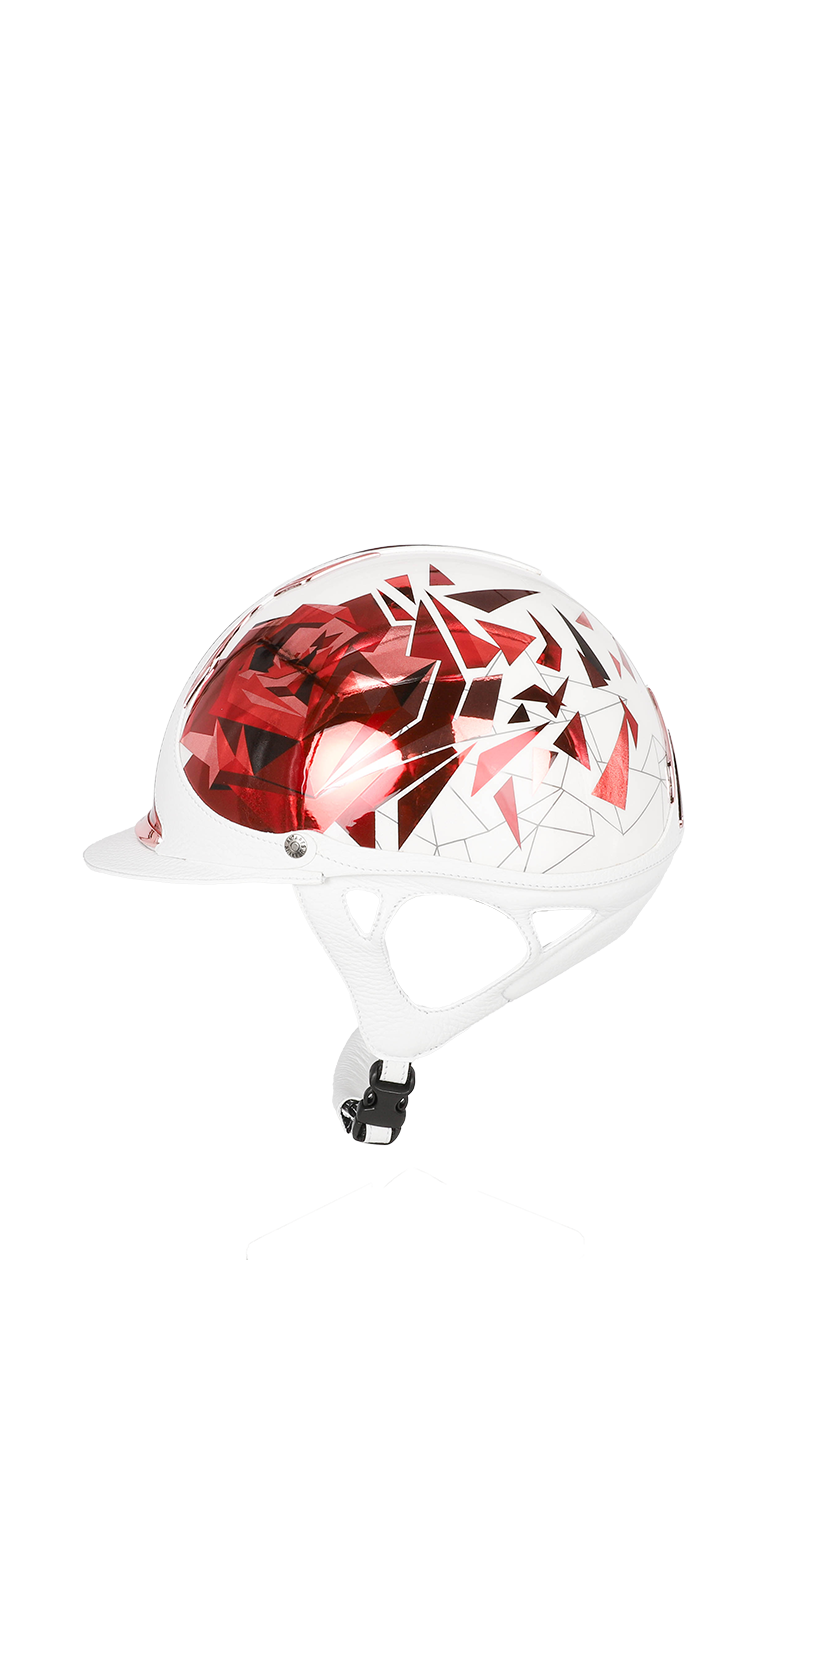 Custom-made riding helmet to ensure the rider's safety